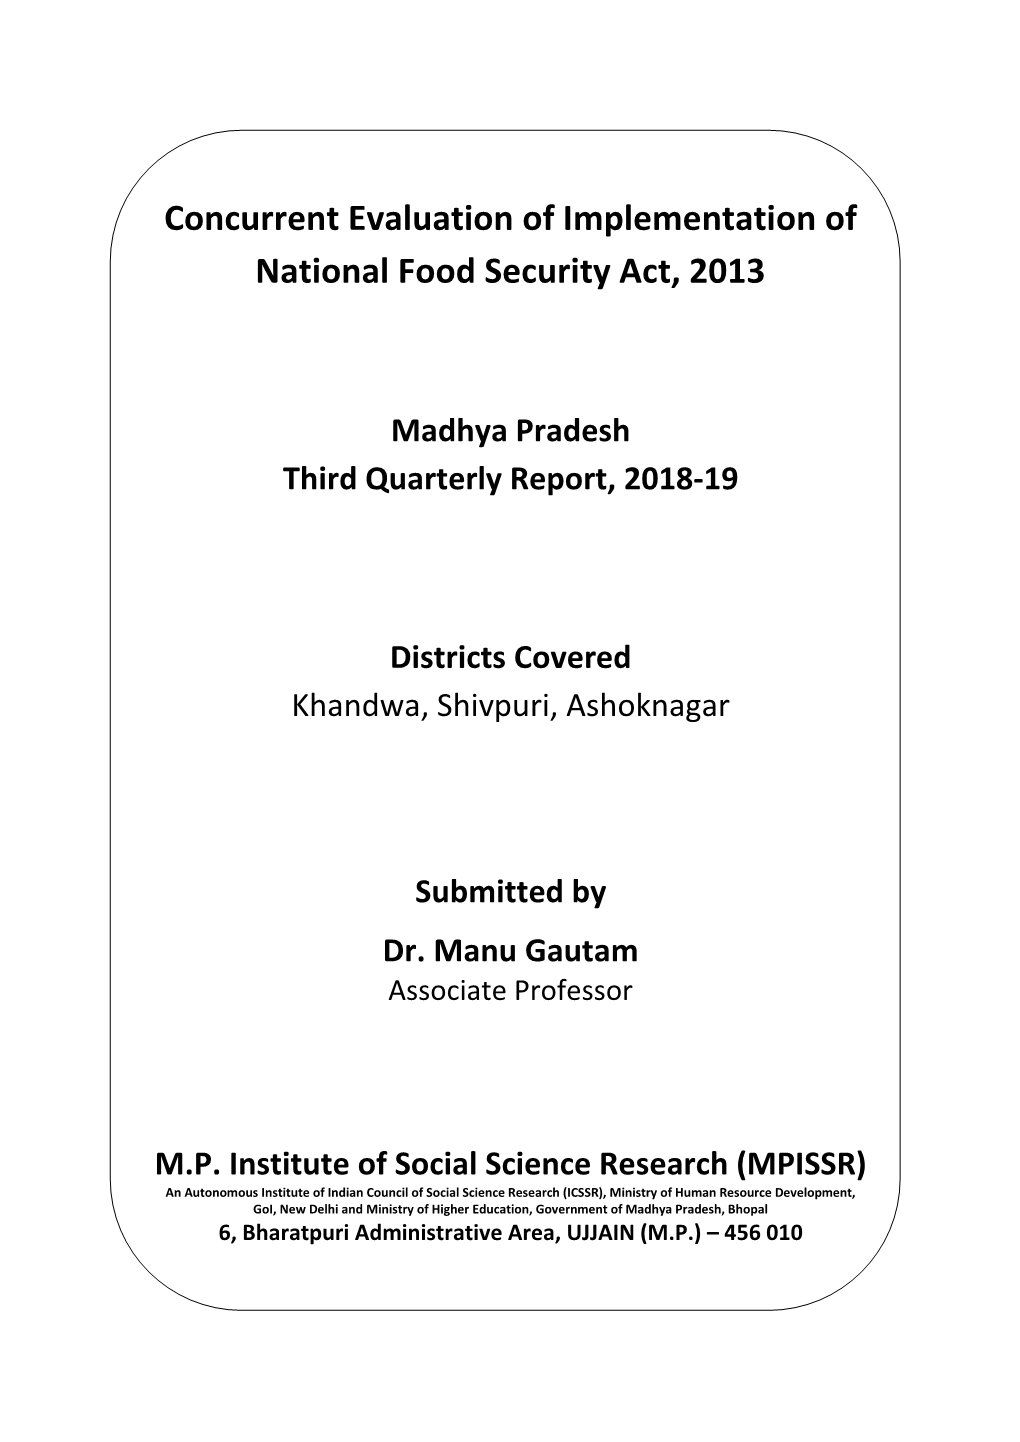 Concurrent Evaluation of Implementation of National Food Security Act, 2013